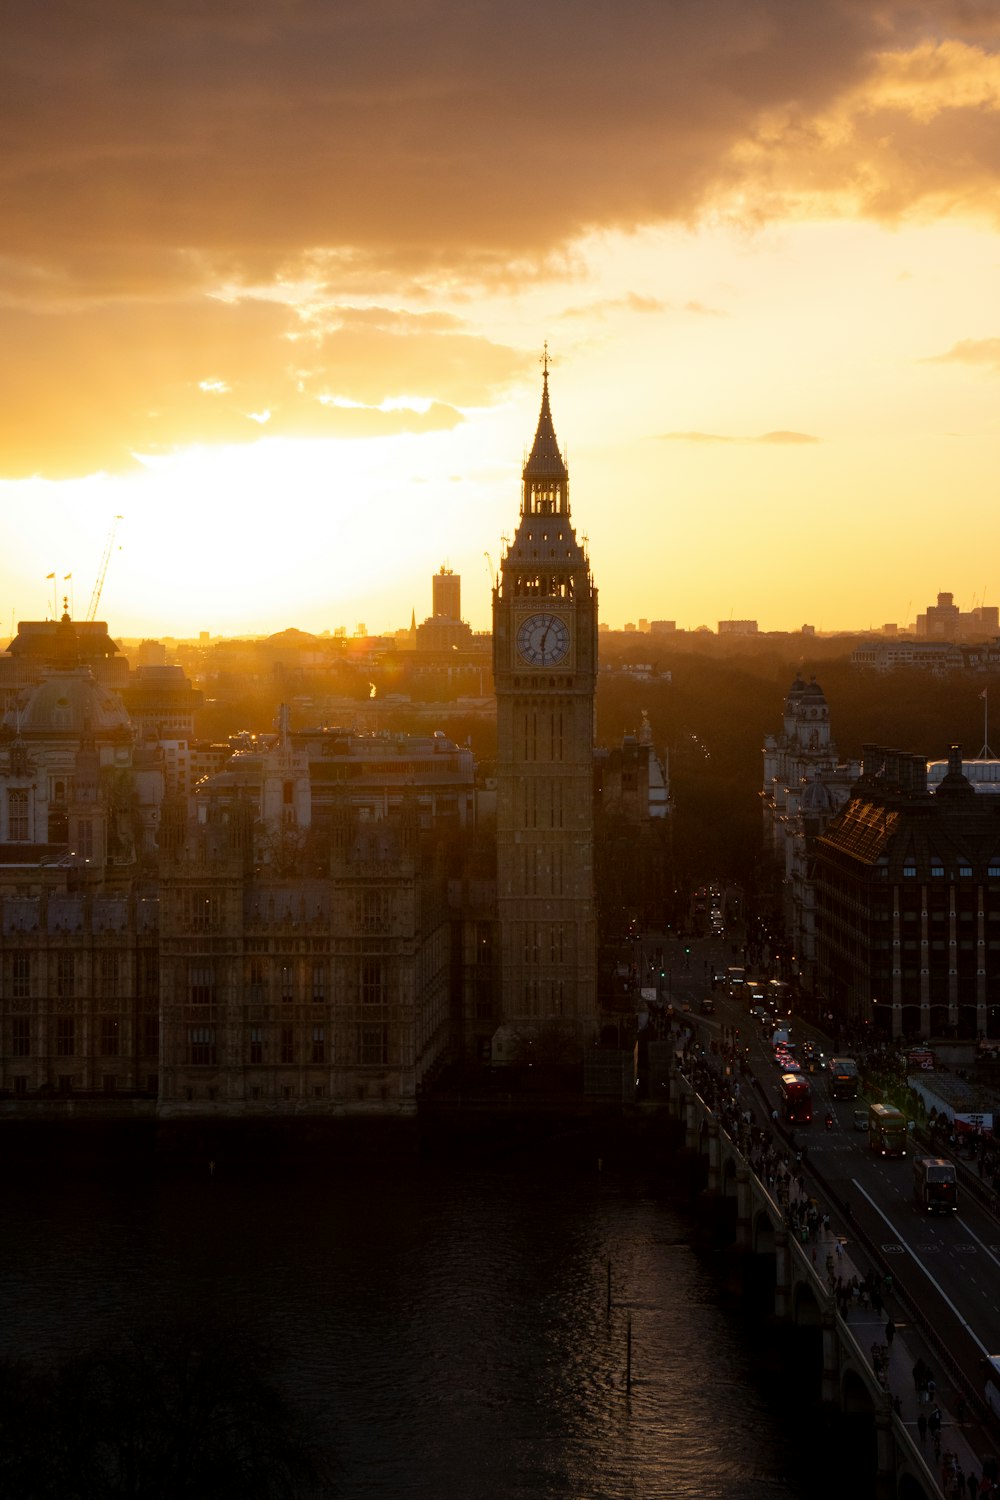 the sun is setting over the city of london